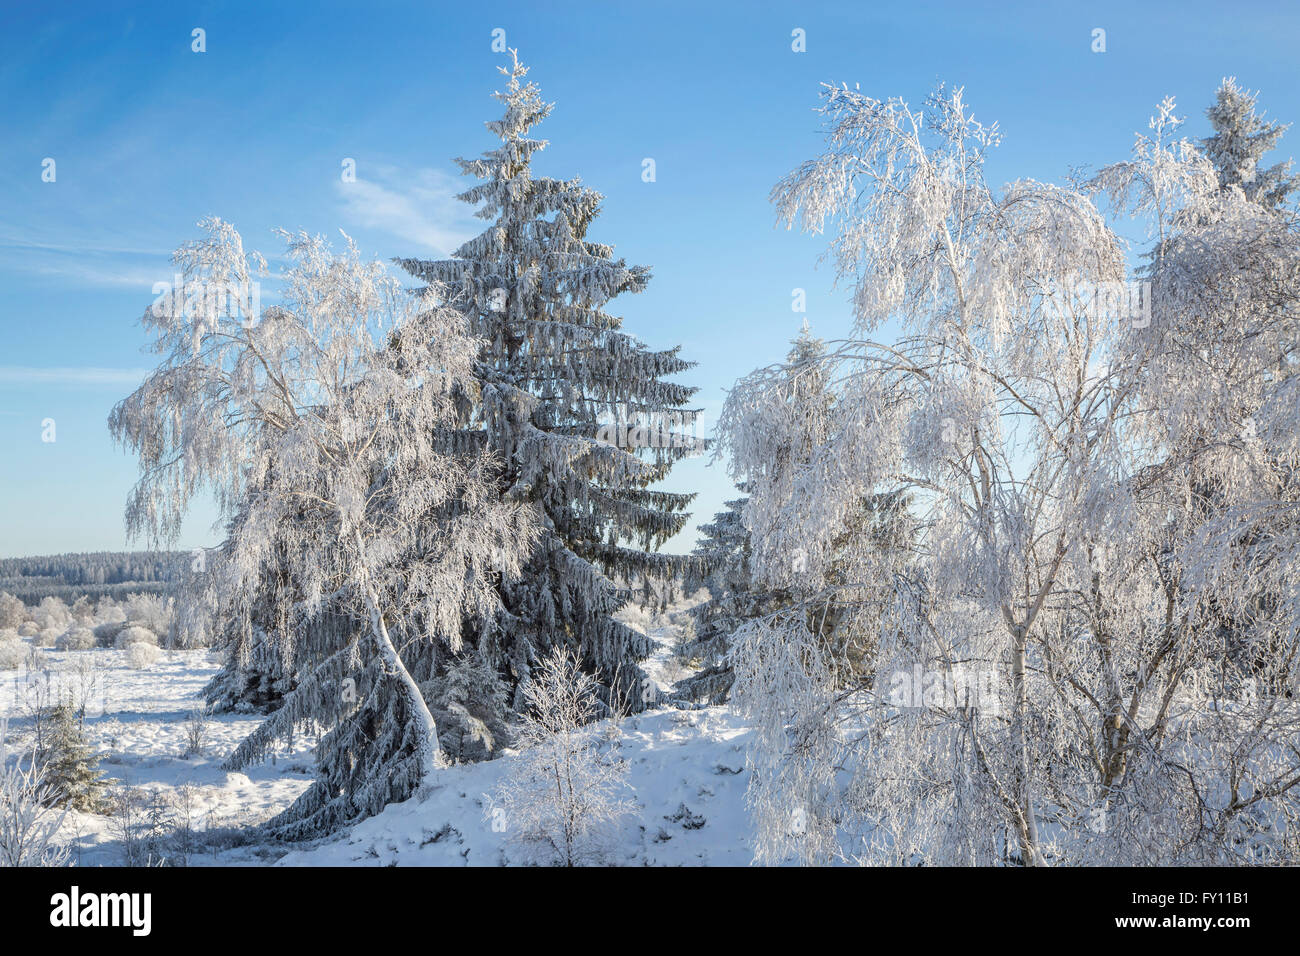 Norway spruce (Picea abies) and downy birch (Betula pubescens) trees covered in frost in winterHigh Fens, Ardennes, Belgium Stock Photo